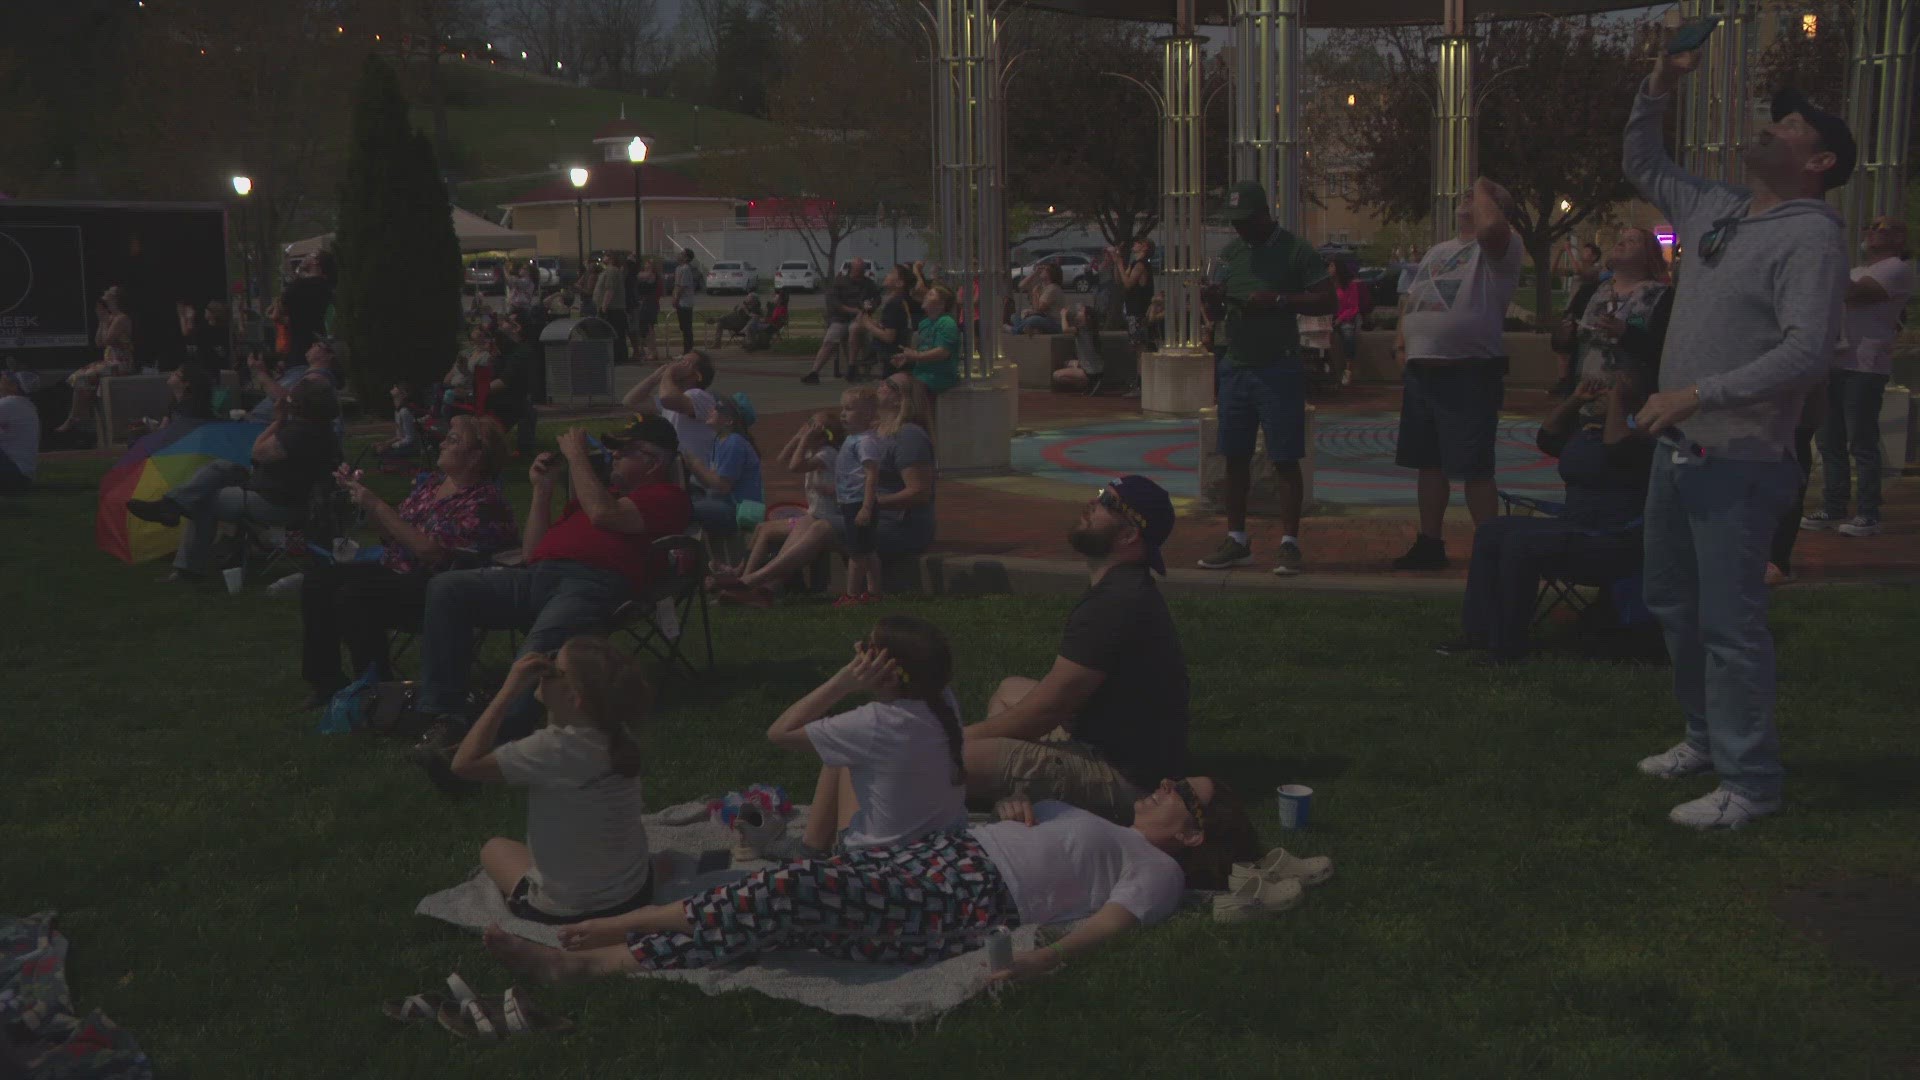 Thousands camped out on blankets and lawn chairs in preparation for the cosmic wonder.